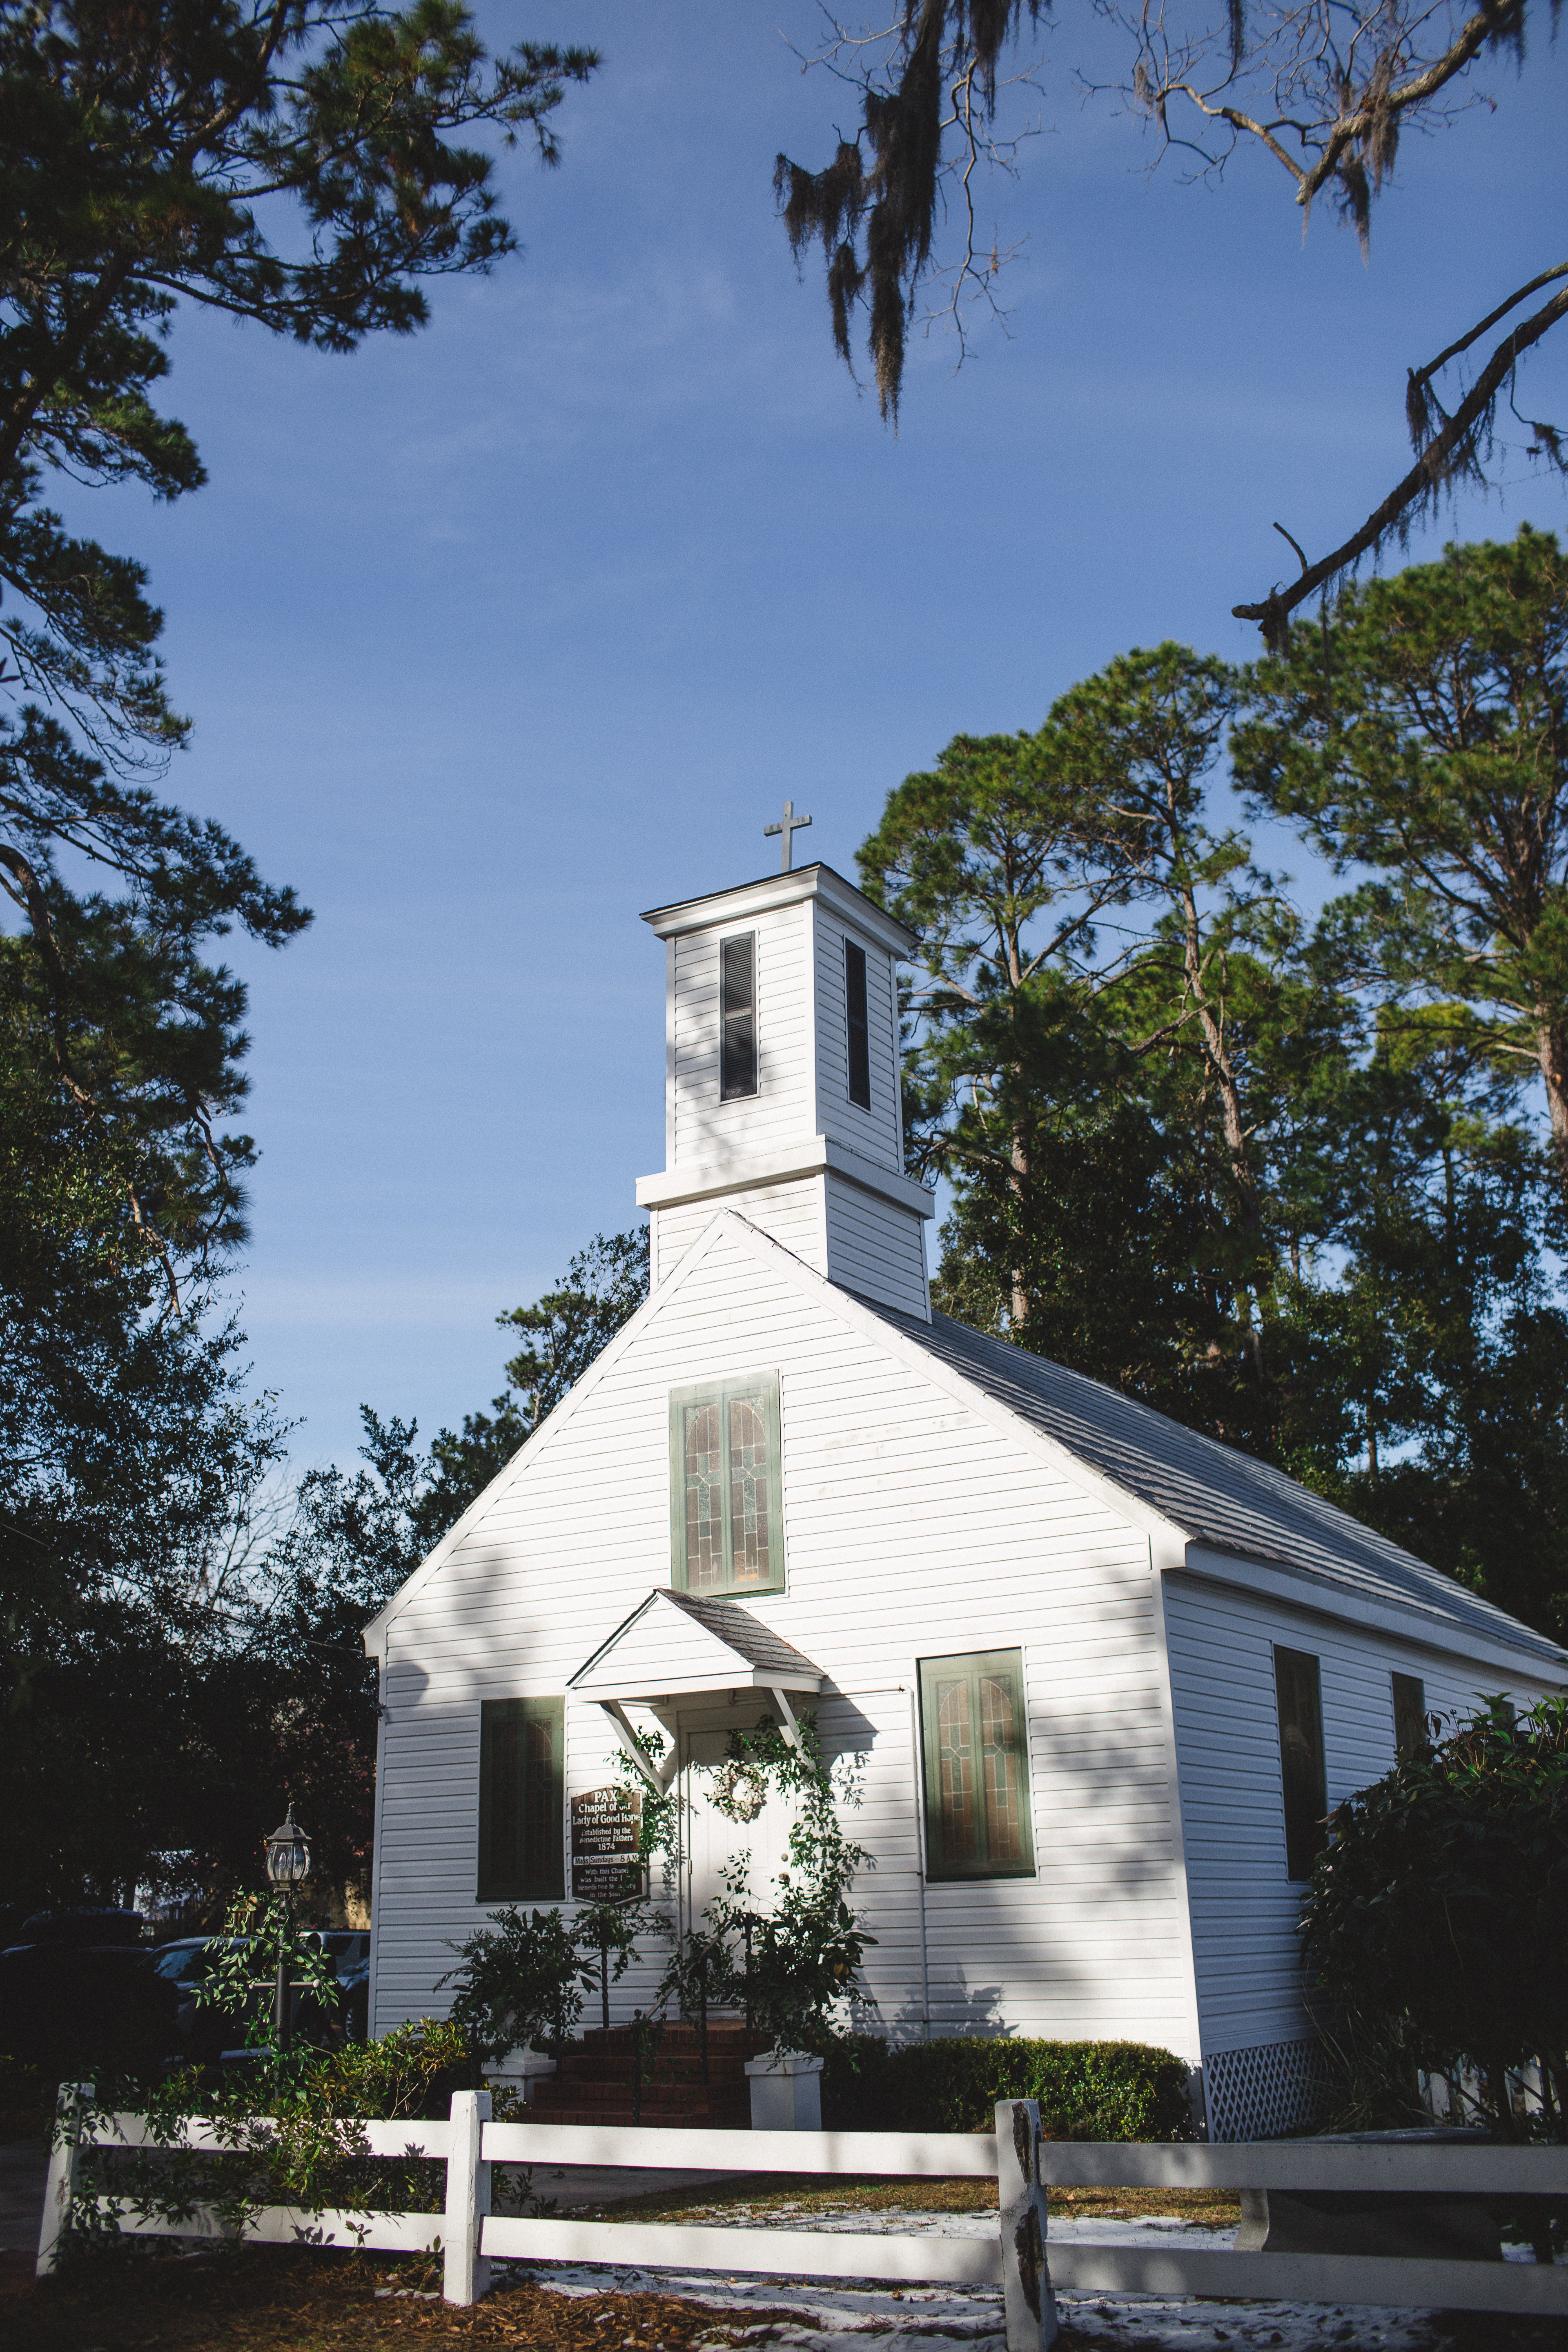 The Chapel of Our Lady of Good Hope – Isle of Hope Wedding – Izzy Hudgins Photography